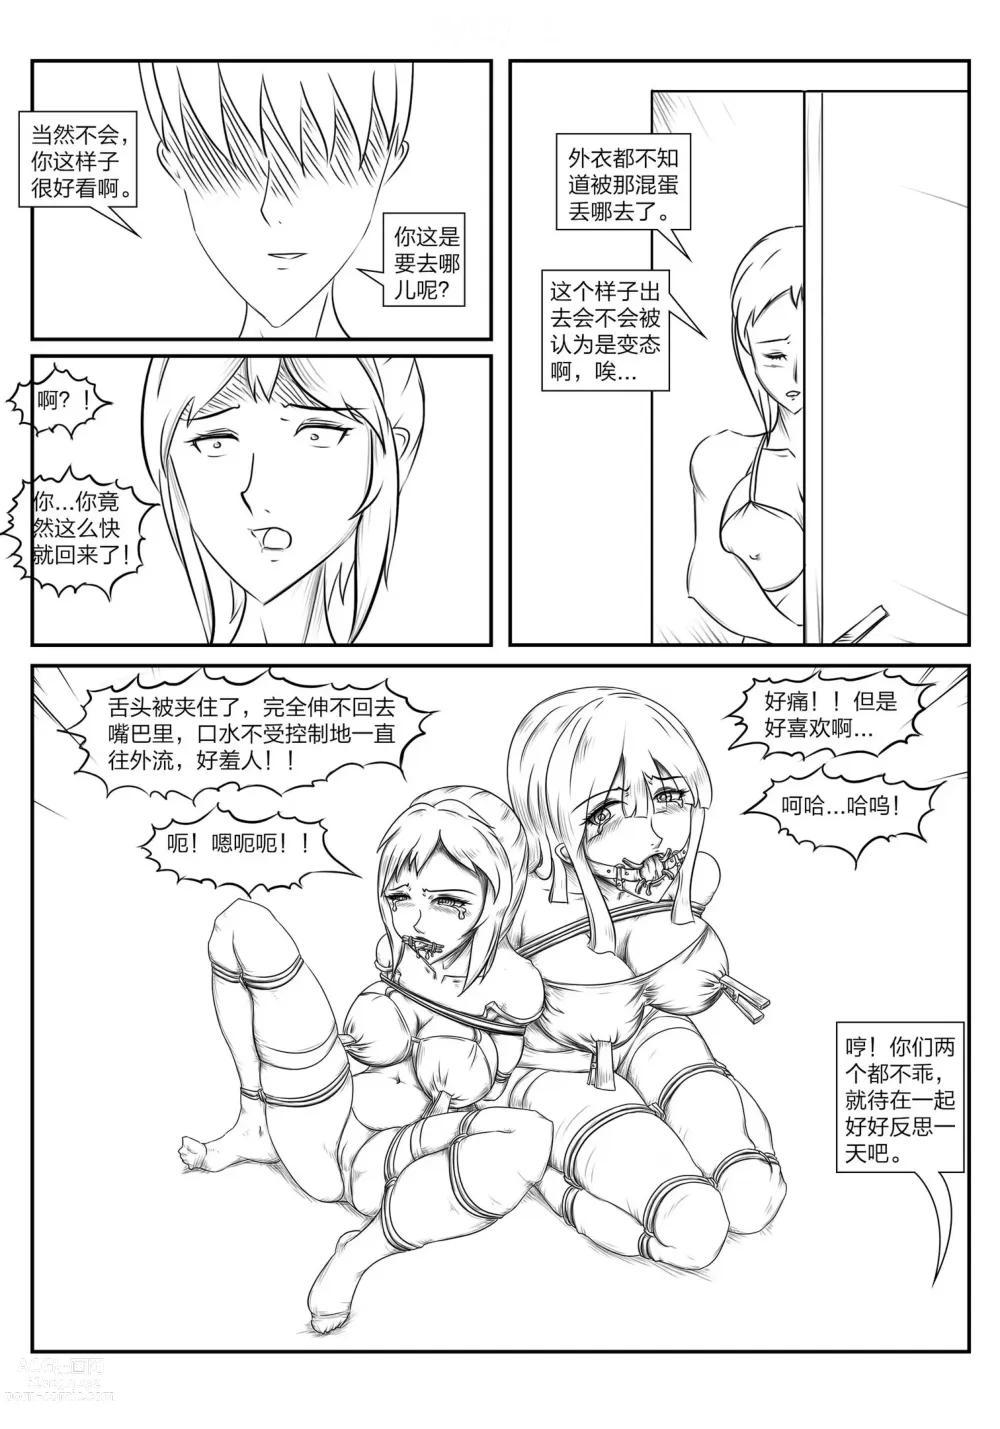 Page 49 of doujinshi The crisis in public self bondage